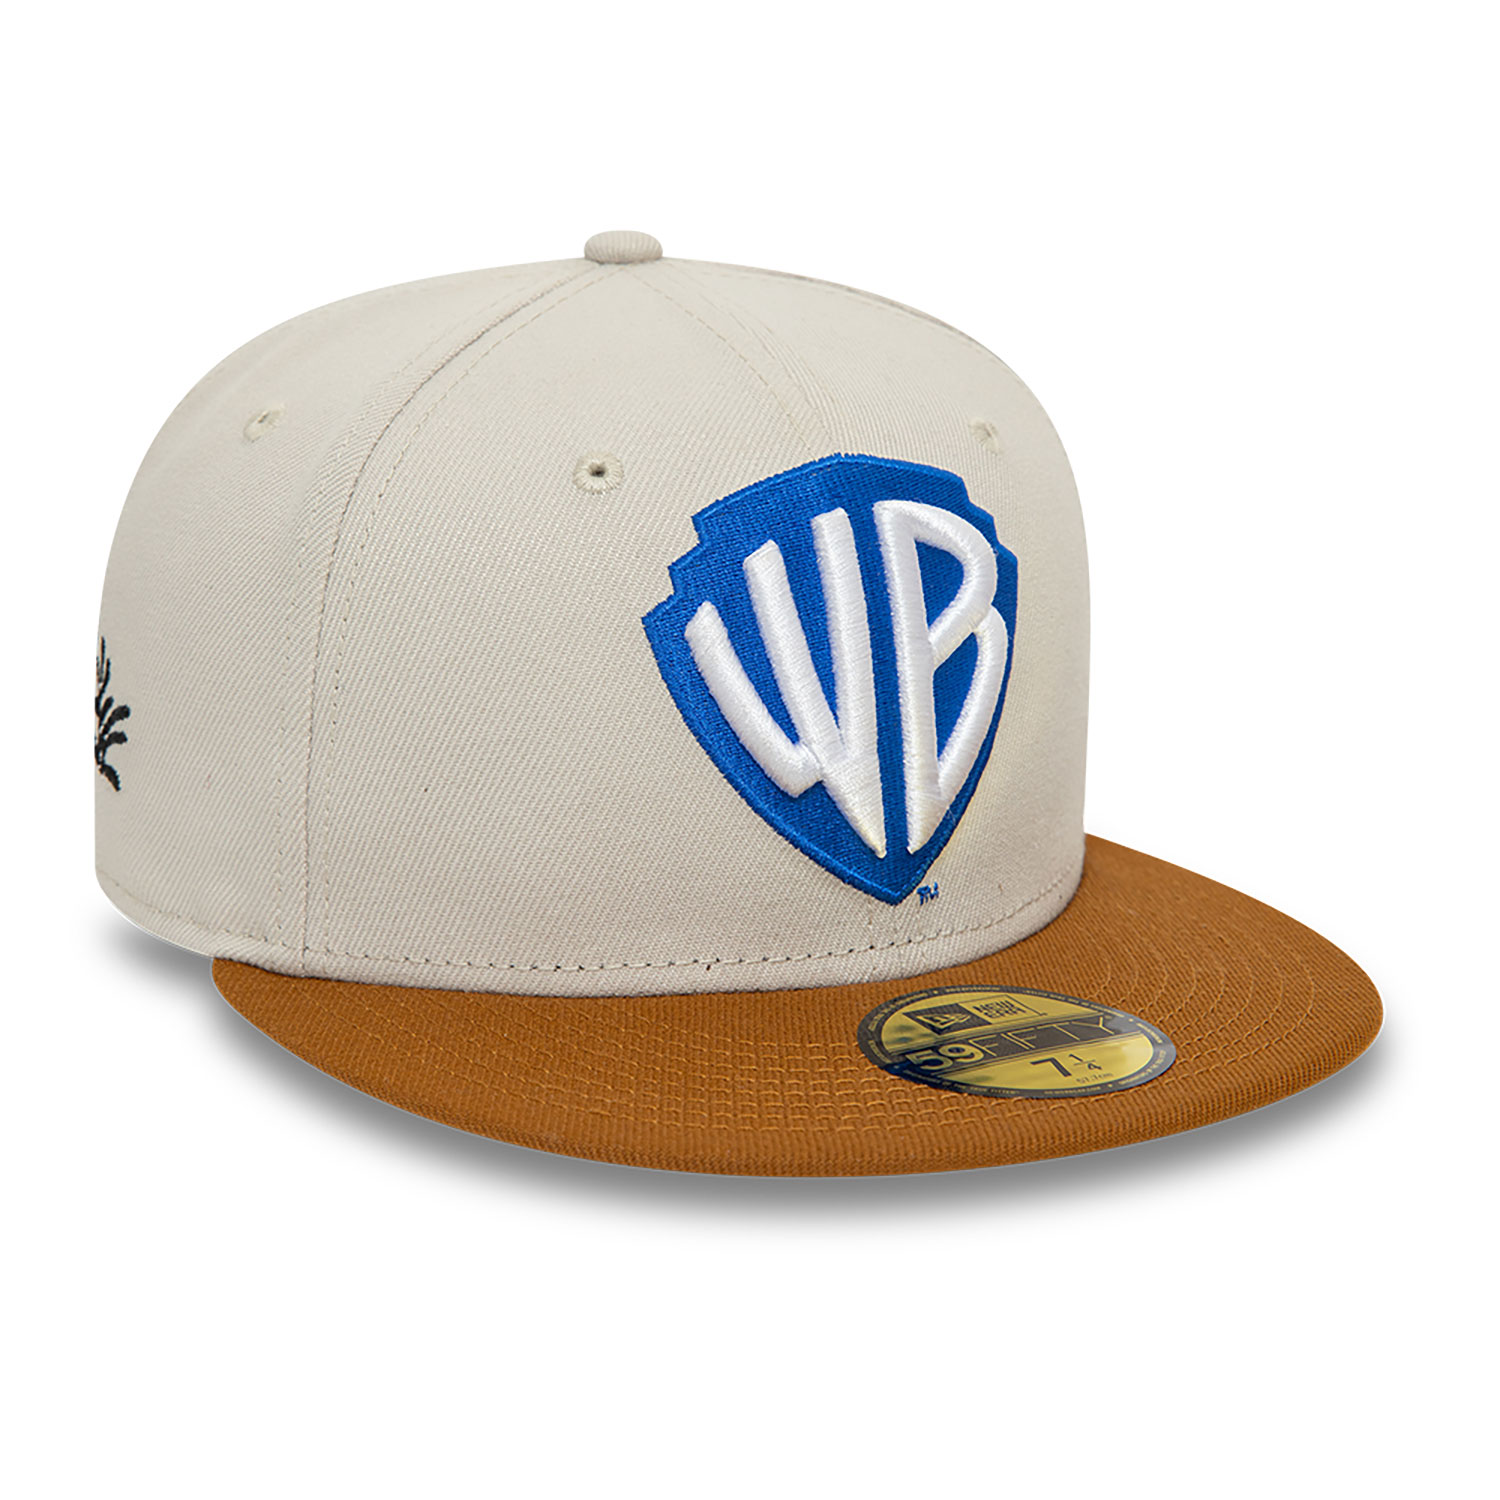 Warner Brothers Shield Logo Stone 59FIFTY Fitted Cap